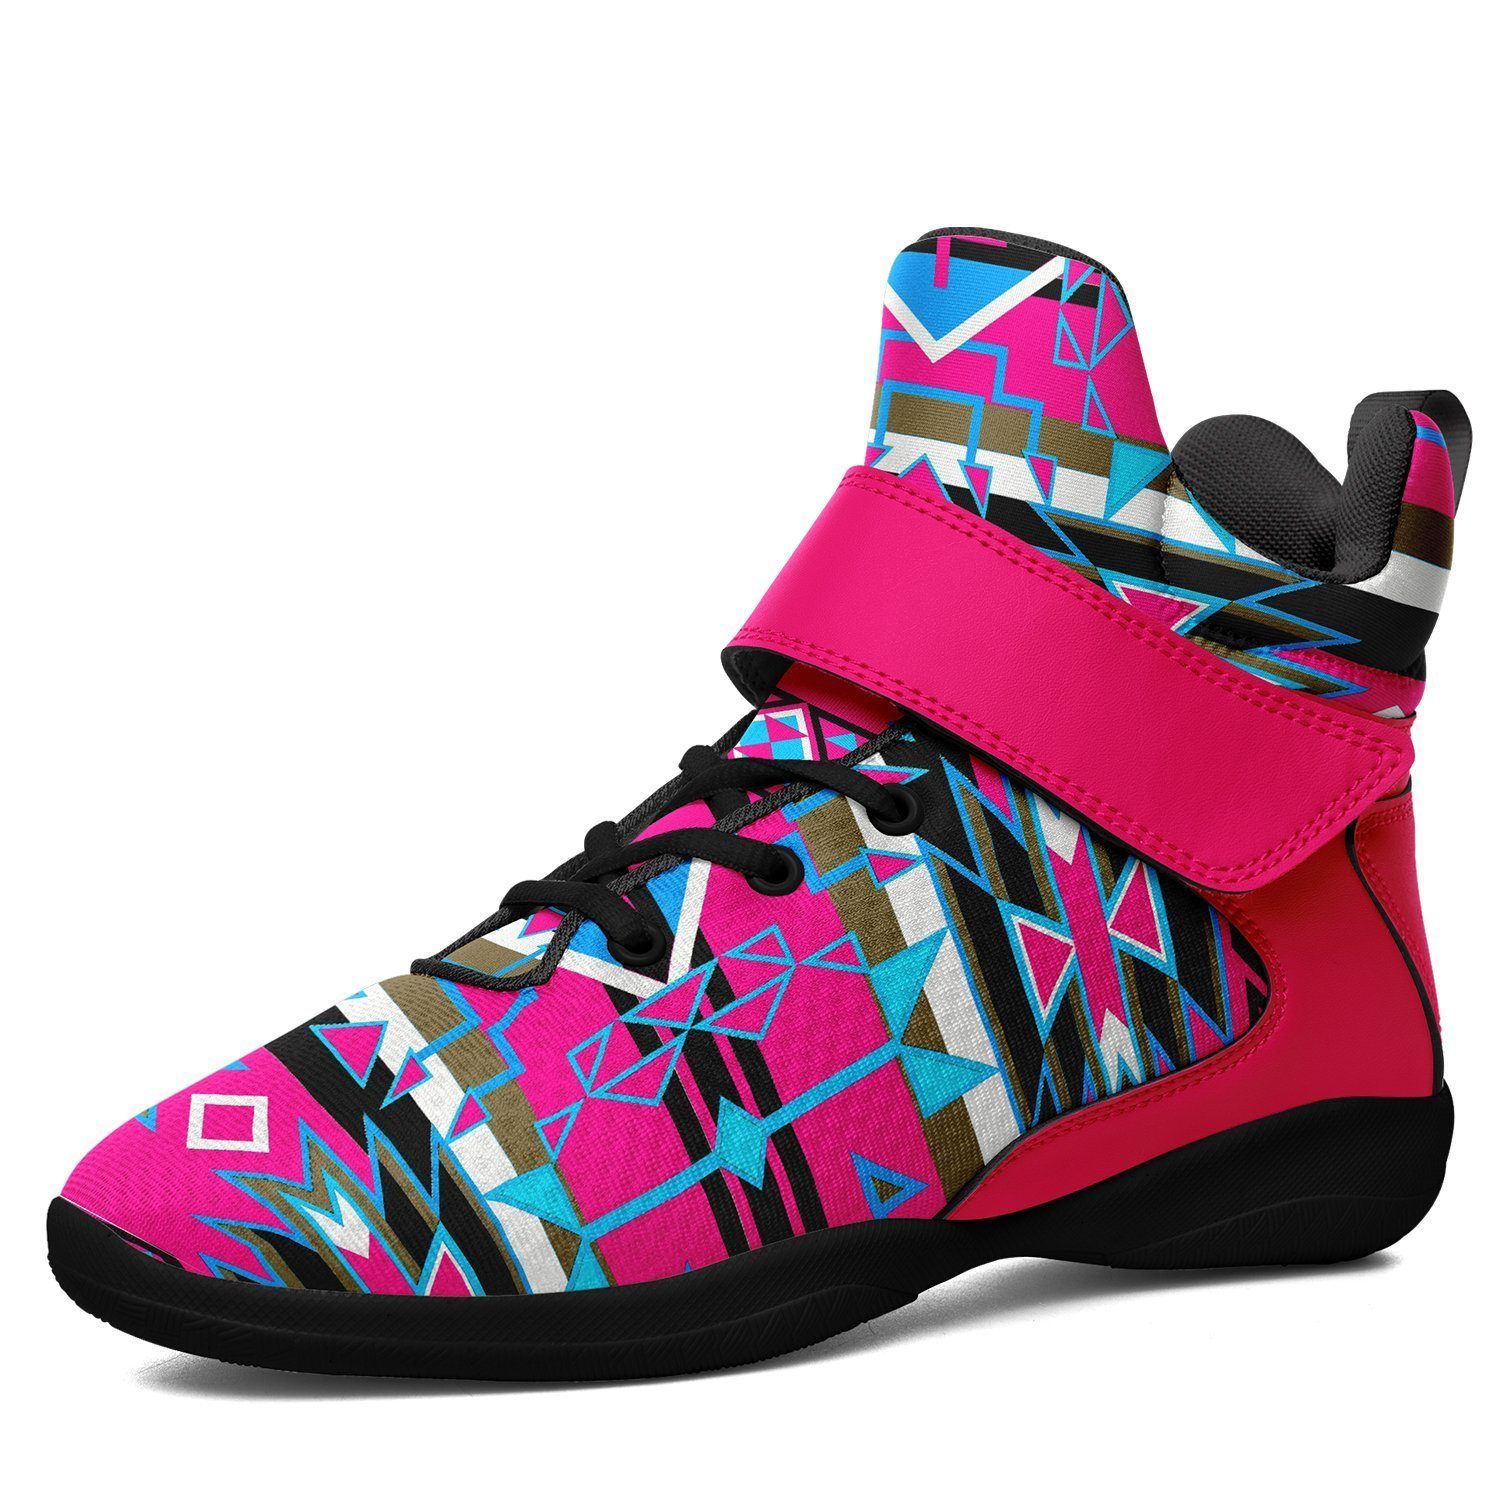 Force of Nature Sunset Storm Ipottaa Basketball / Sport High Top Shoes - Black Sole 49 Dzine US Men 7 / EUR 40 Black Sole with Pink Strap 